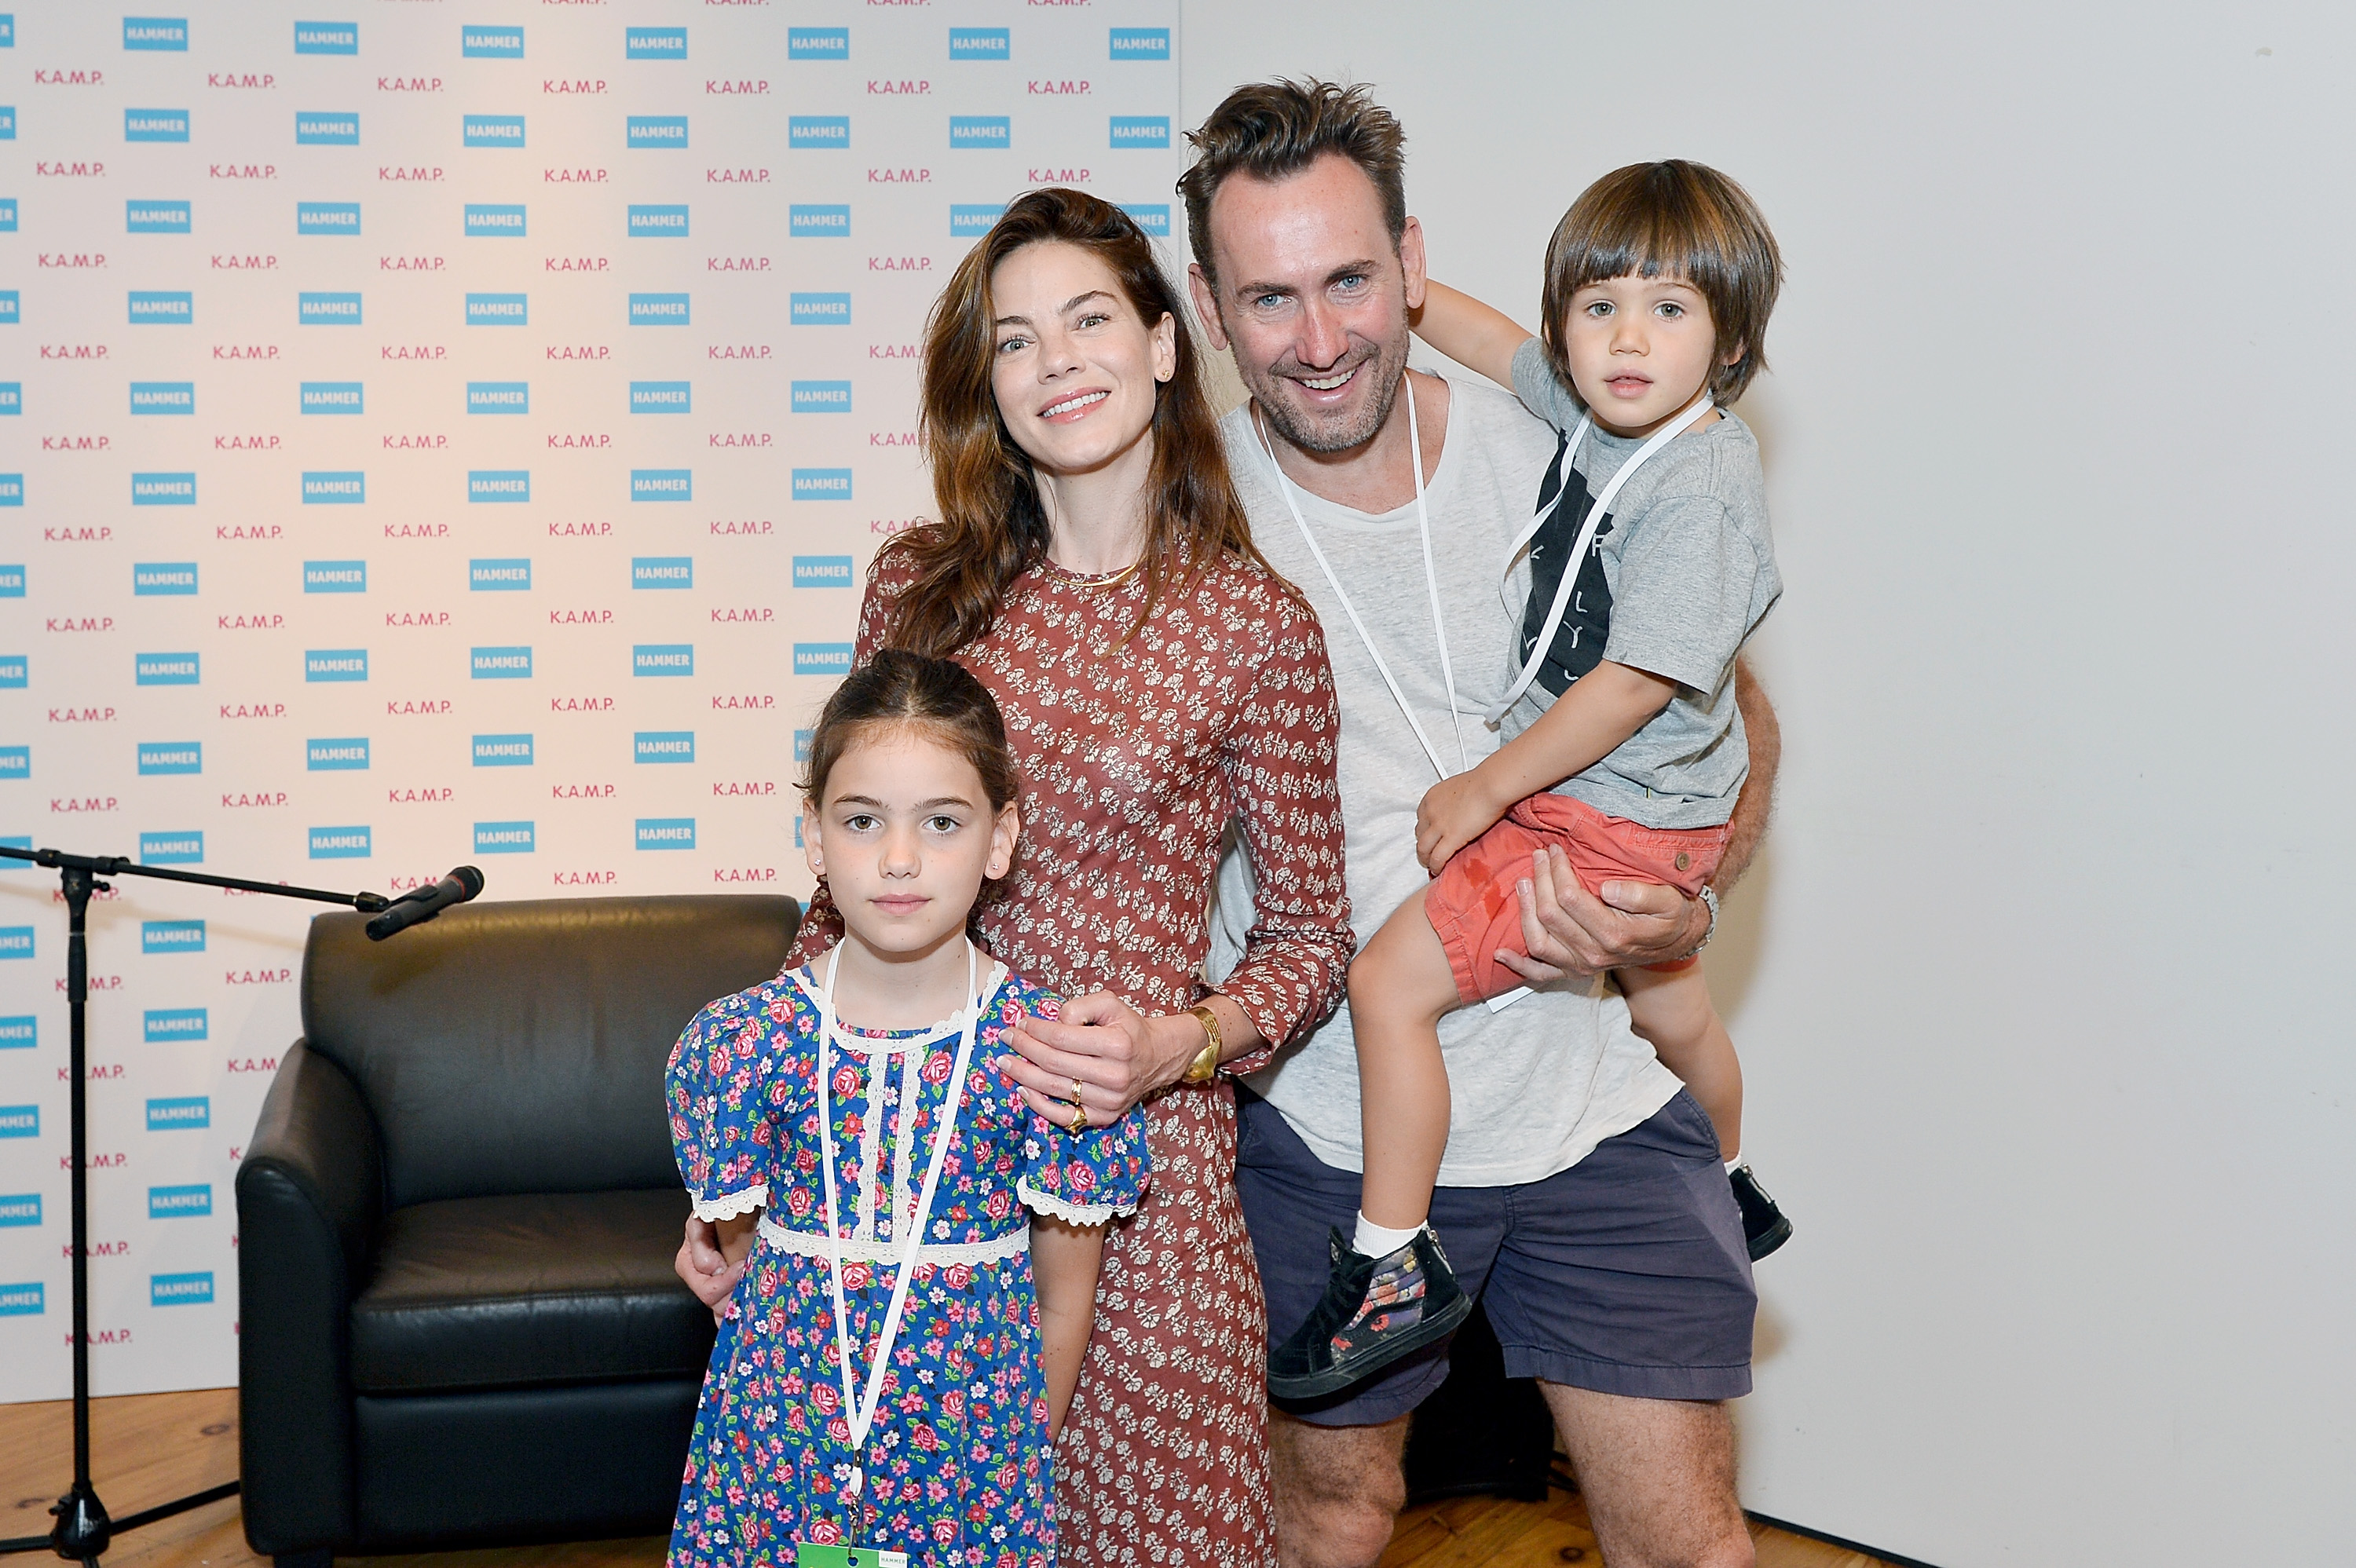 Michelle Monaghan and Peter White with their children at the Hammer Museum K.A.M.P. (Kids' Art Museum Project) on May 21, 2017, in Los Angeles, California. | Source: Getty Images